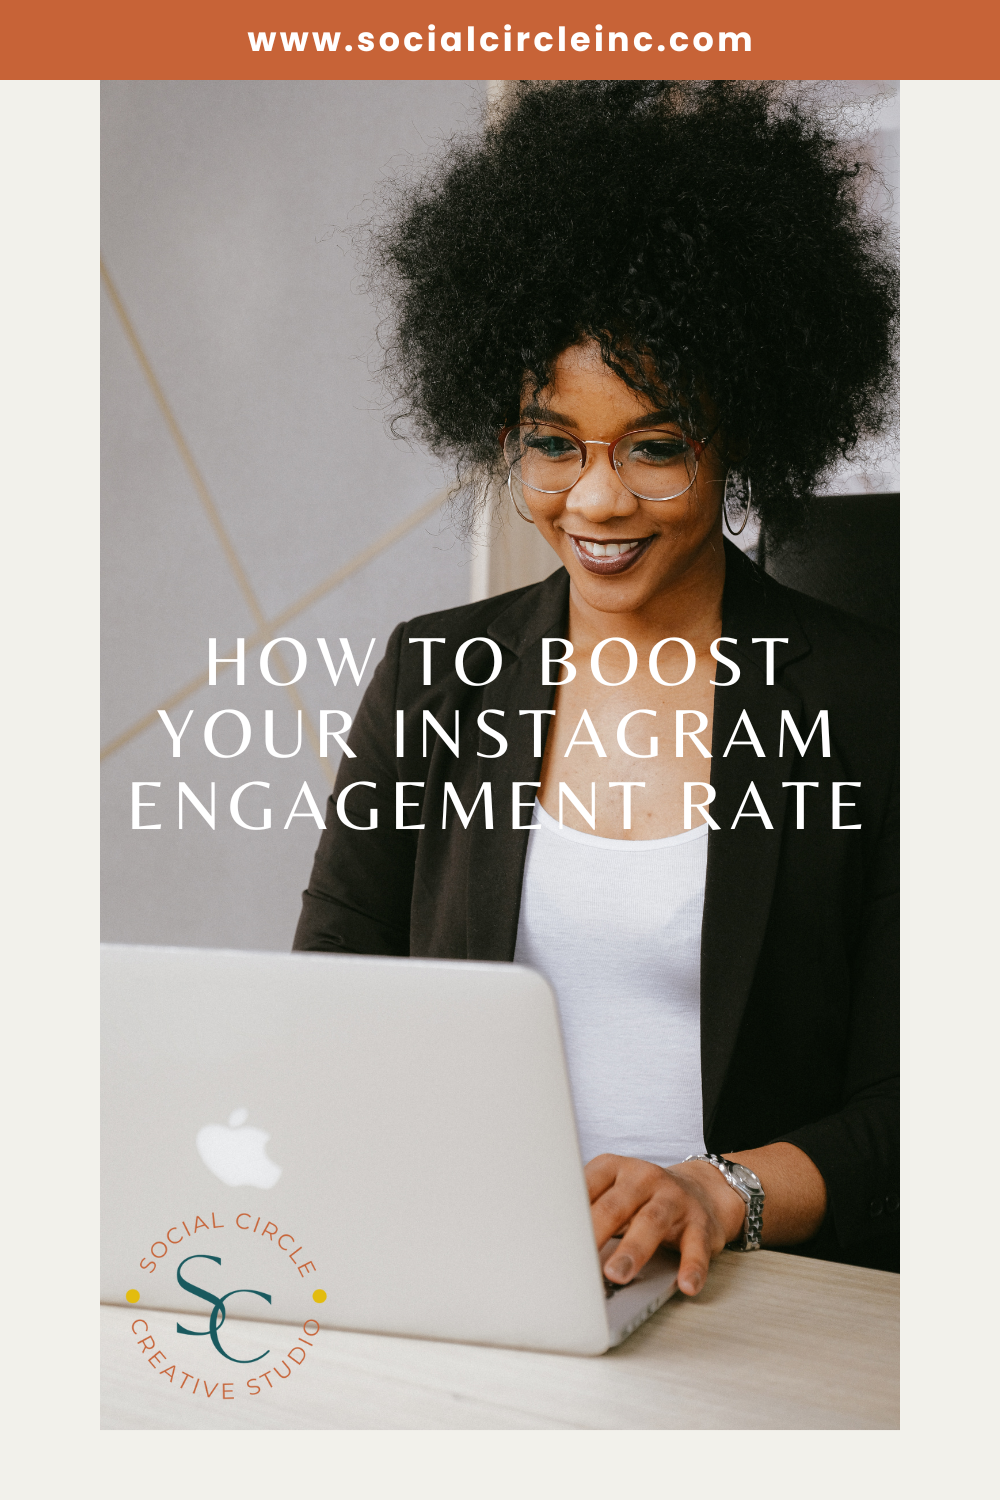 How to Boost Your Instagram Engagement Rate